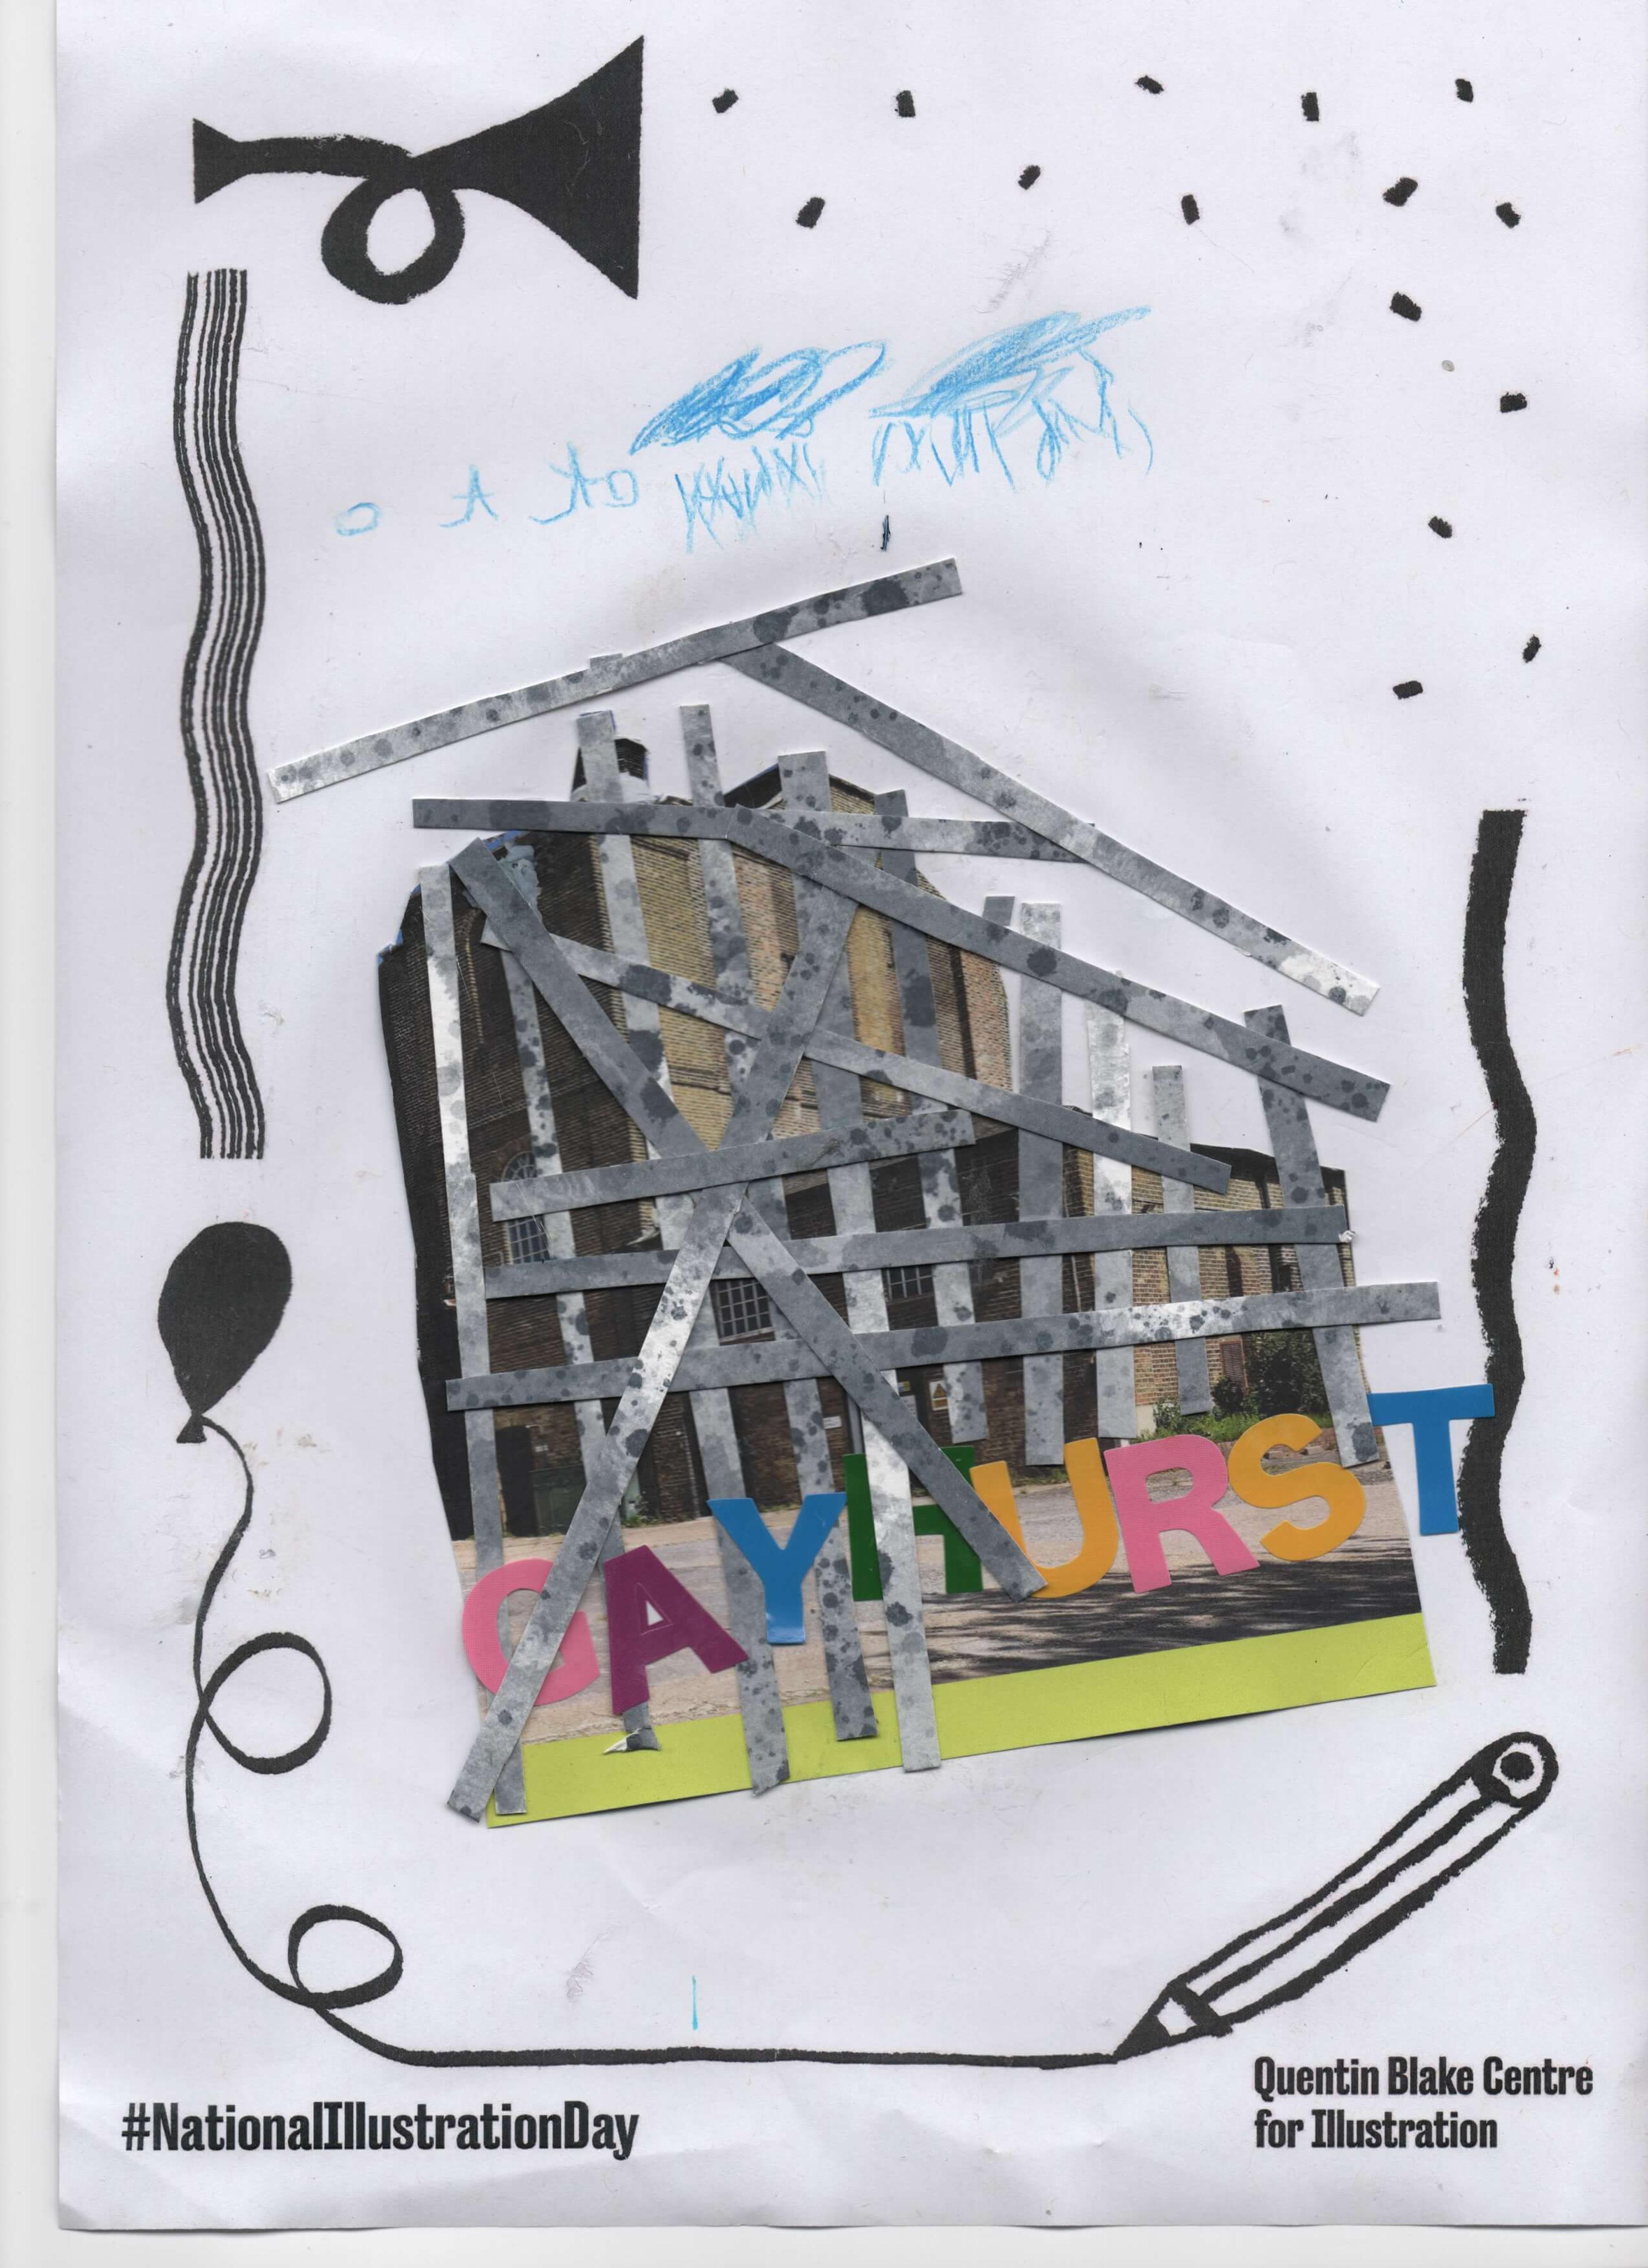 Strips of gray paper stuck in an abstract grid pattern on top of a cutout of an industrial building with the word ' Gayhurst' stuck on in colourful alphabet stickers.